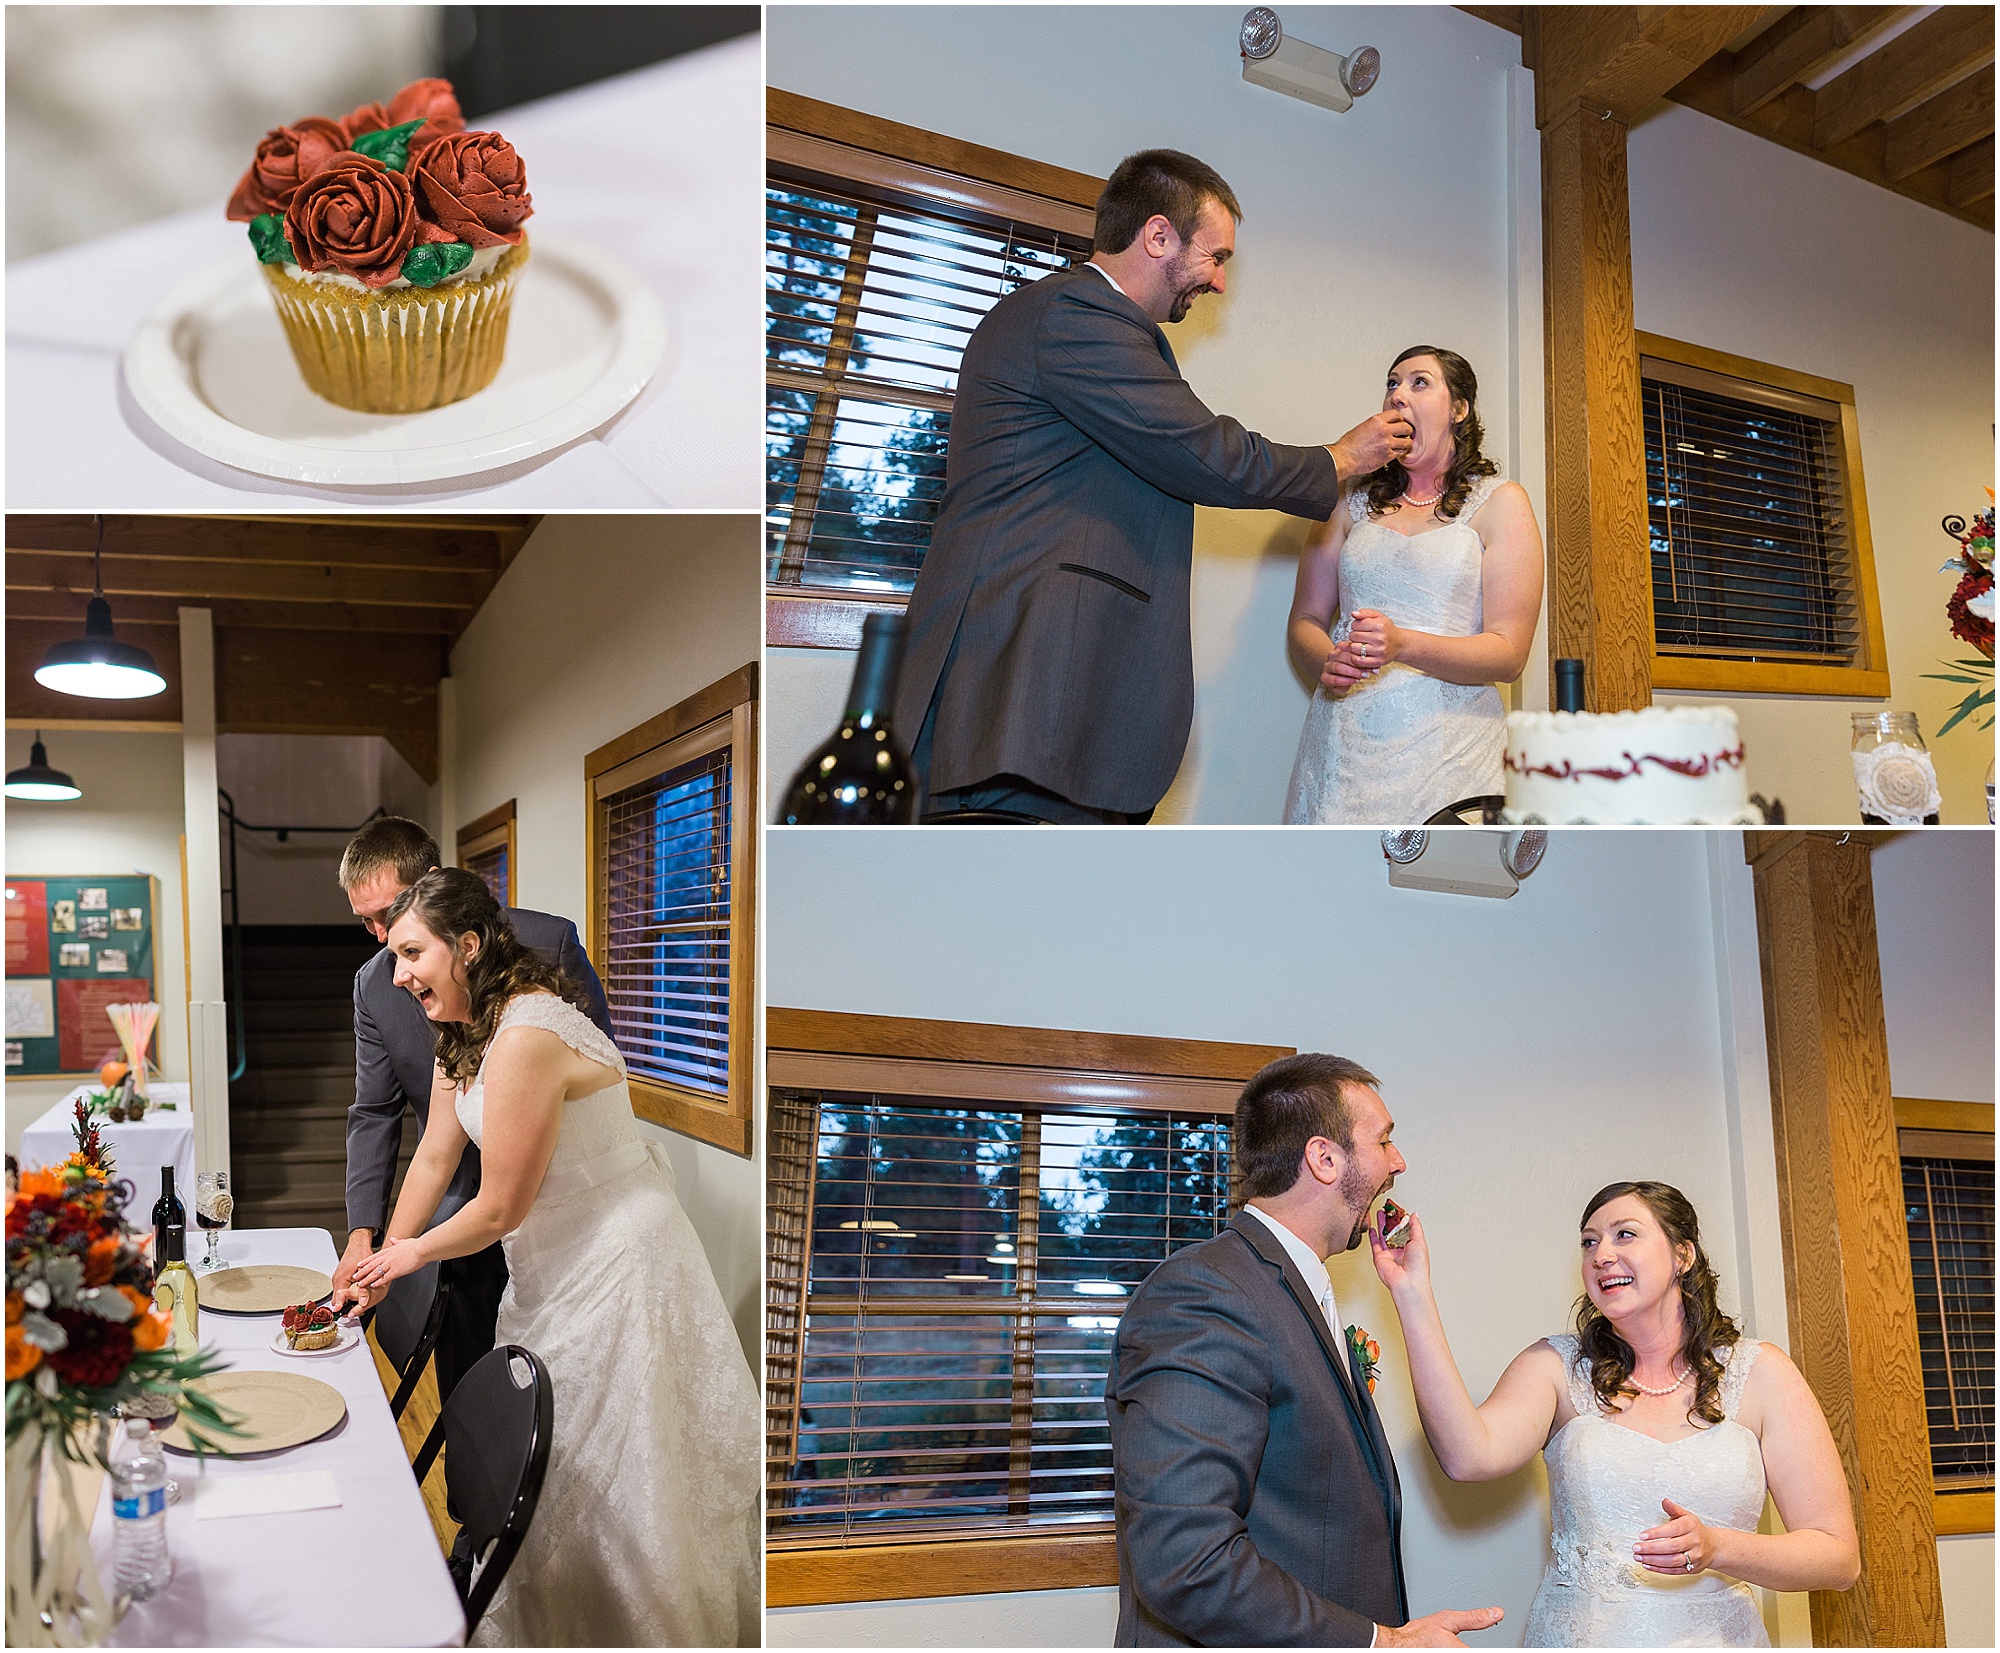 A newly married couple cuts their cake at their wedding in Bend, Oregon. | Erica Swantek Photography